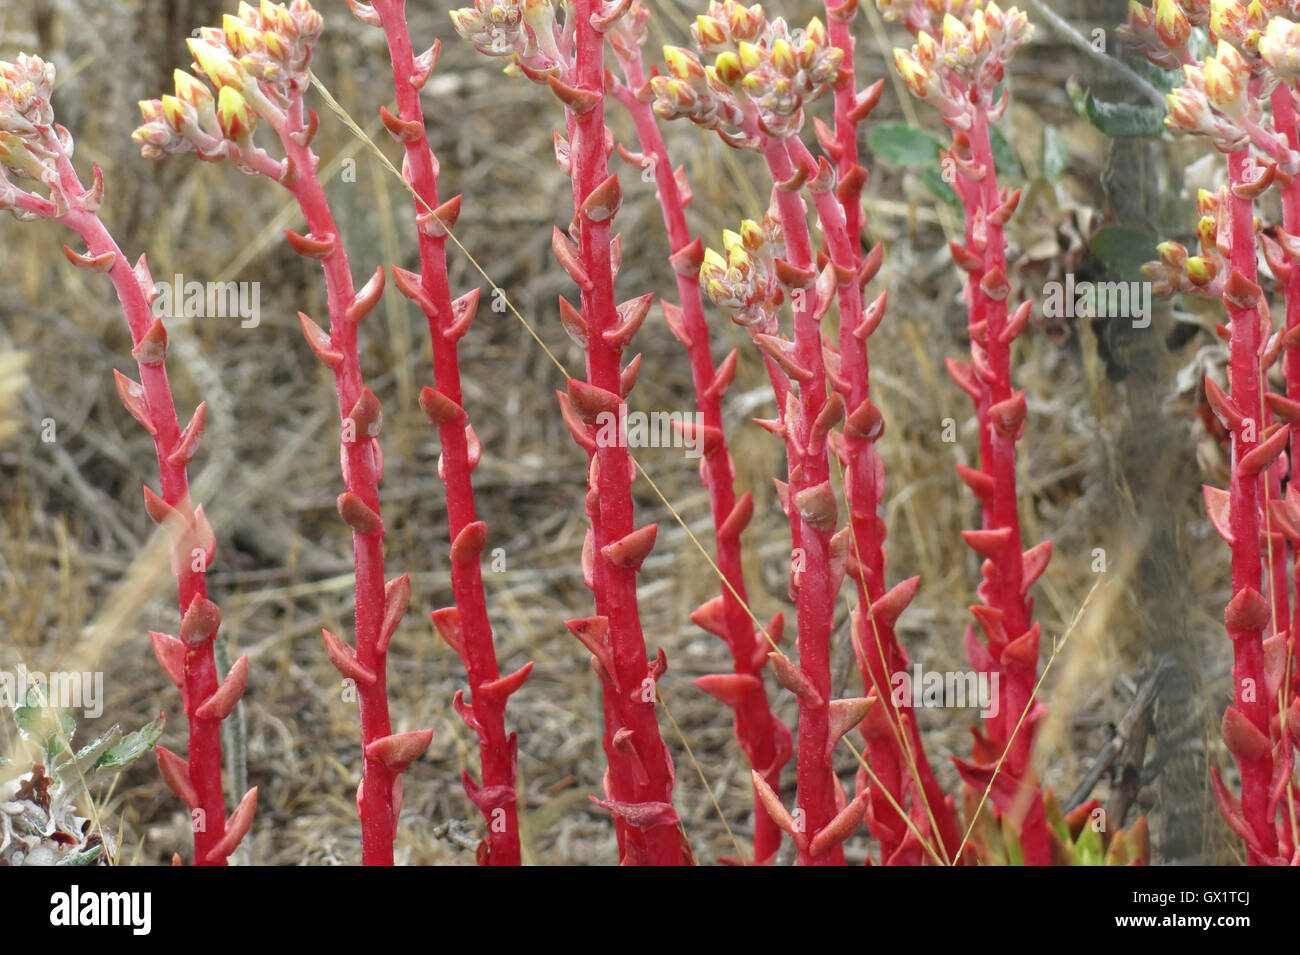 Red stemmed plants in San Francisco Stock Photo